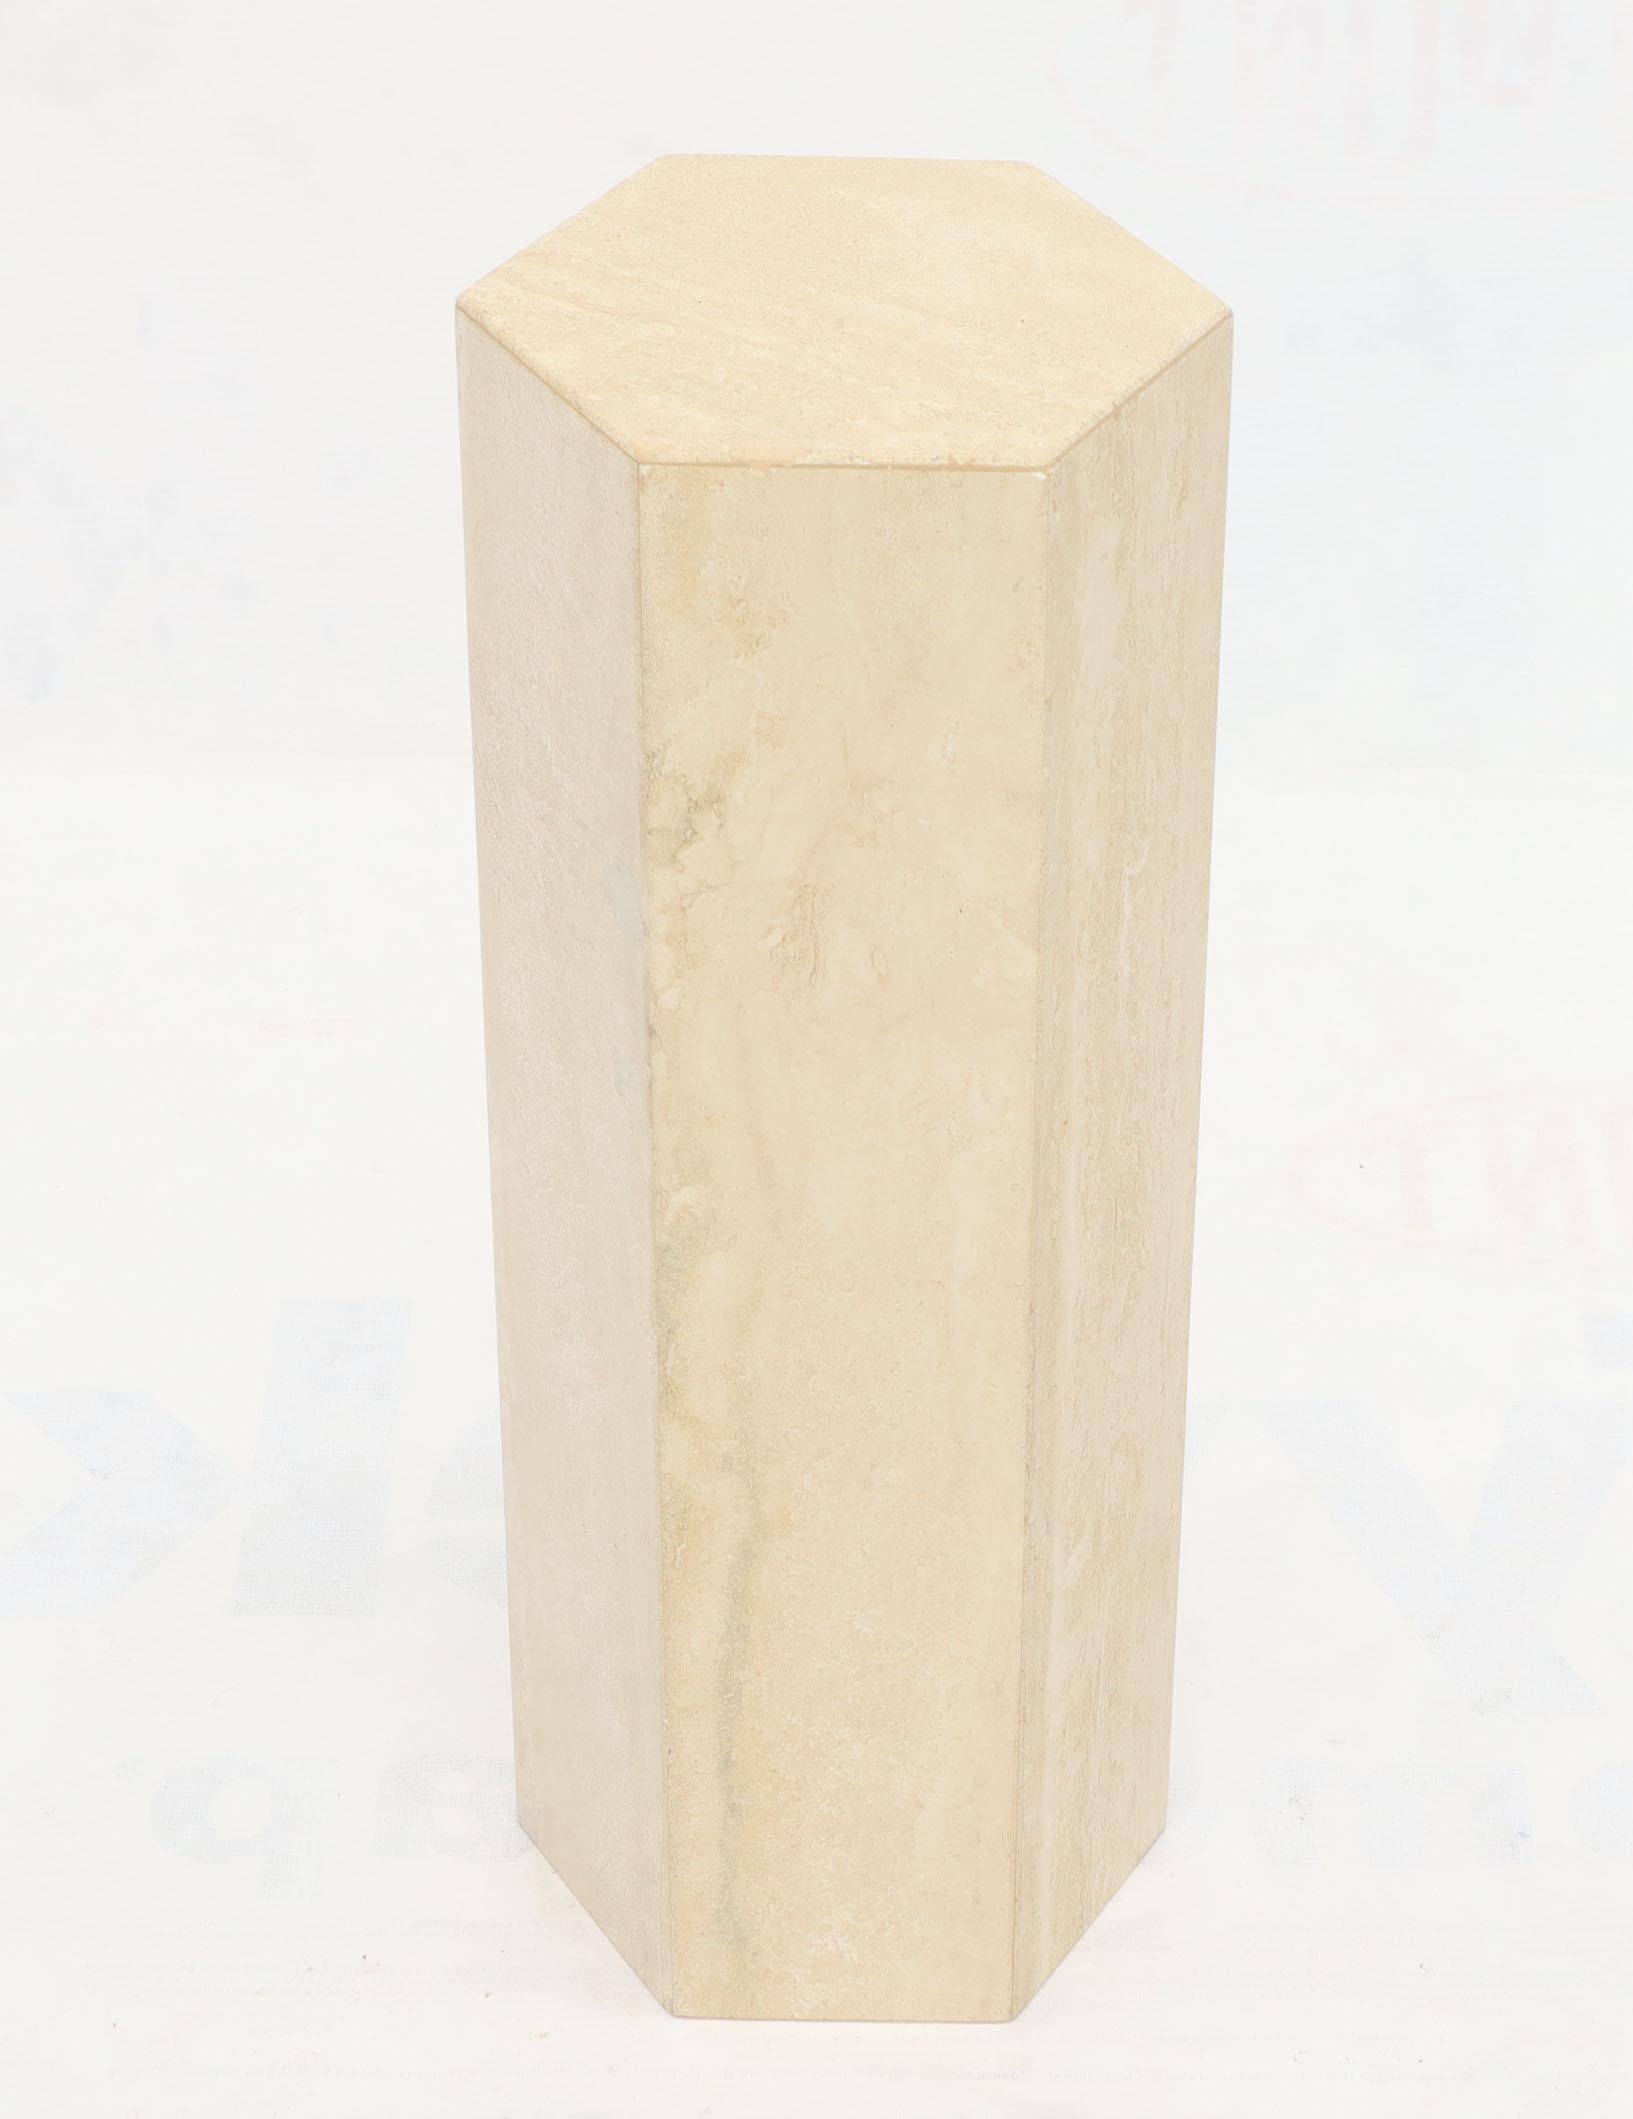 Mid-Century Modern Travertine Marble Tall Tower Shape Table Pedestal In Excellent Condition For Sale In Rockaway, NJ